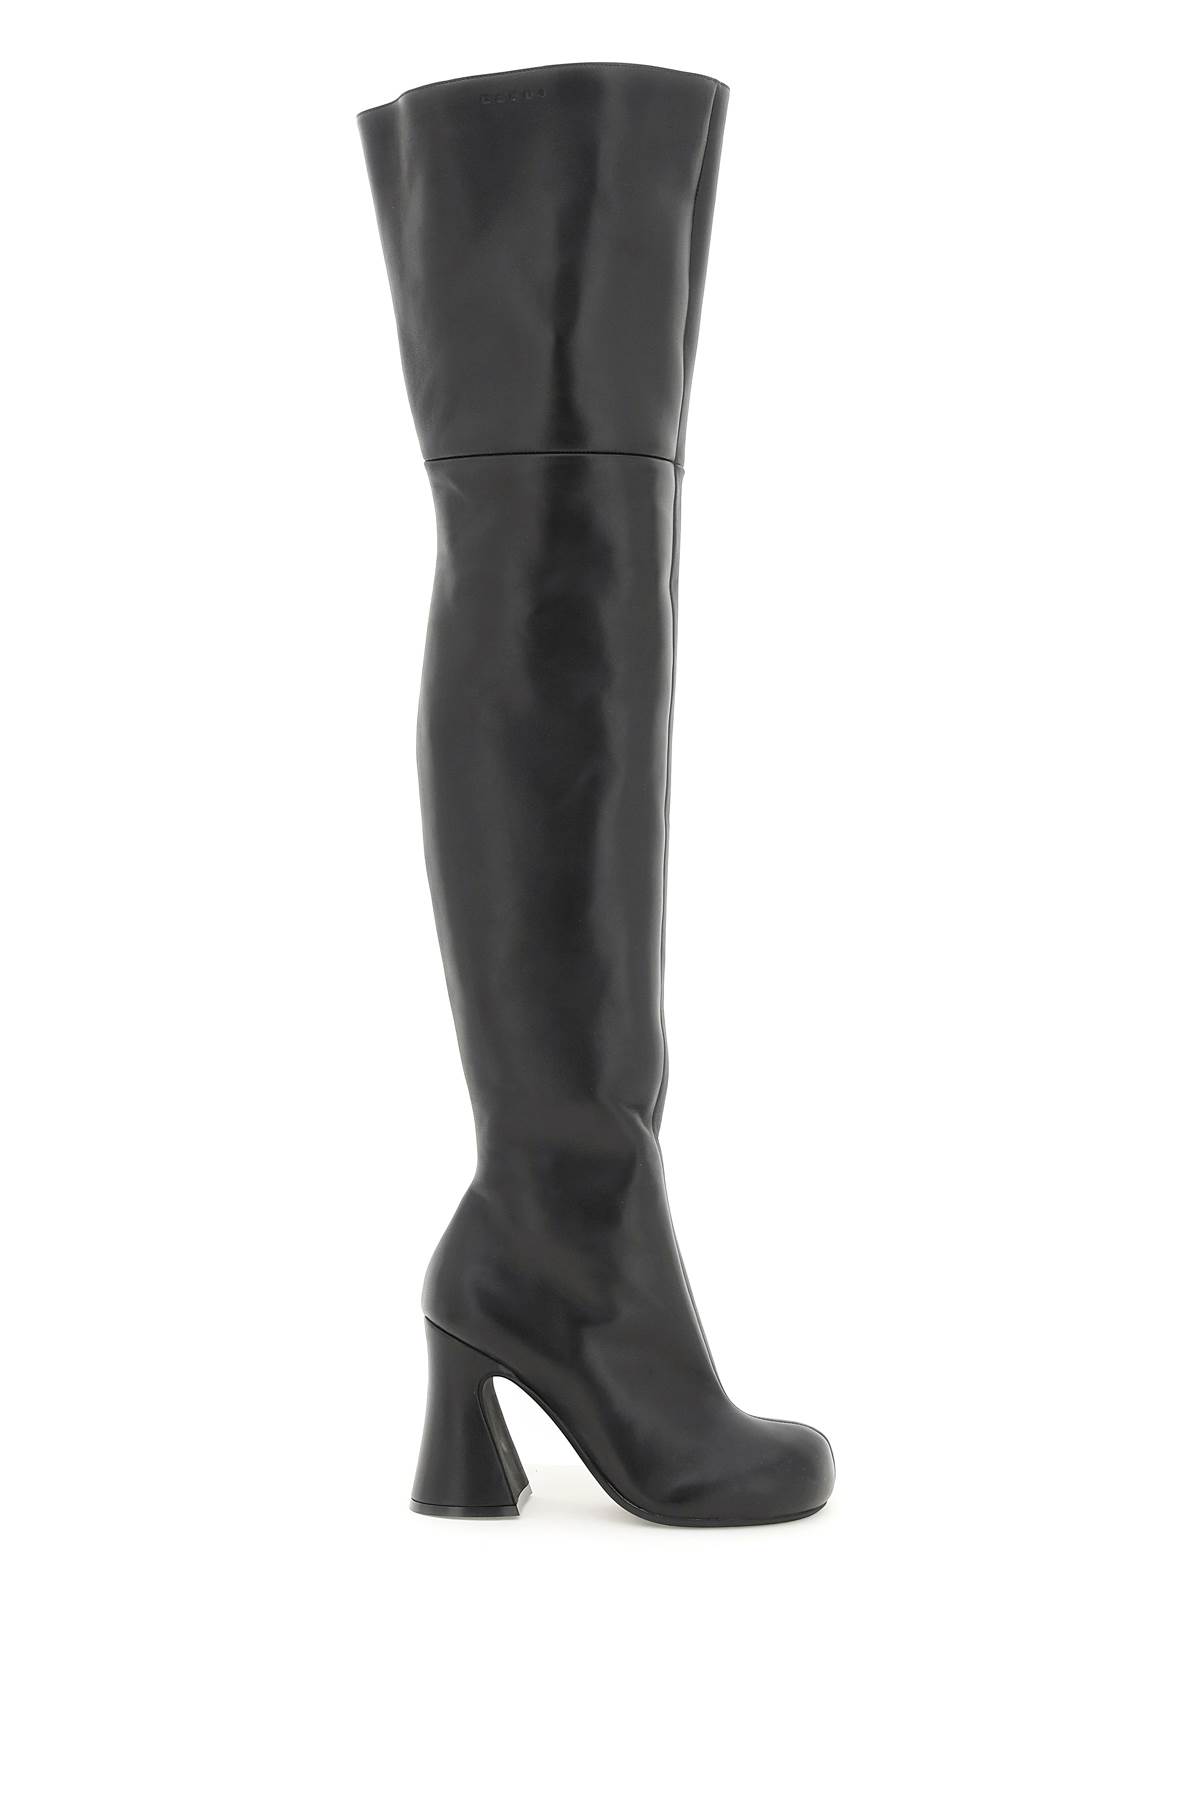 MARNI NAPPA LEATHER OVER-THE-KNEE BOOTS